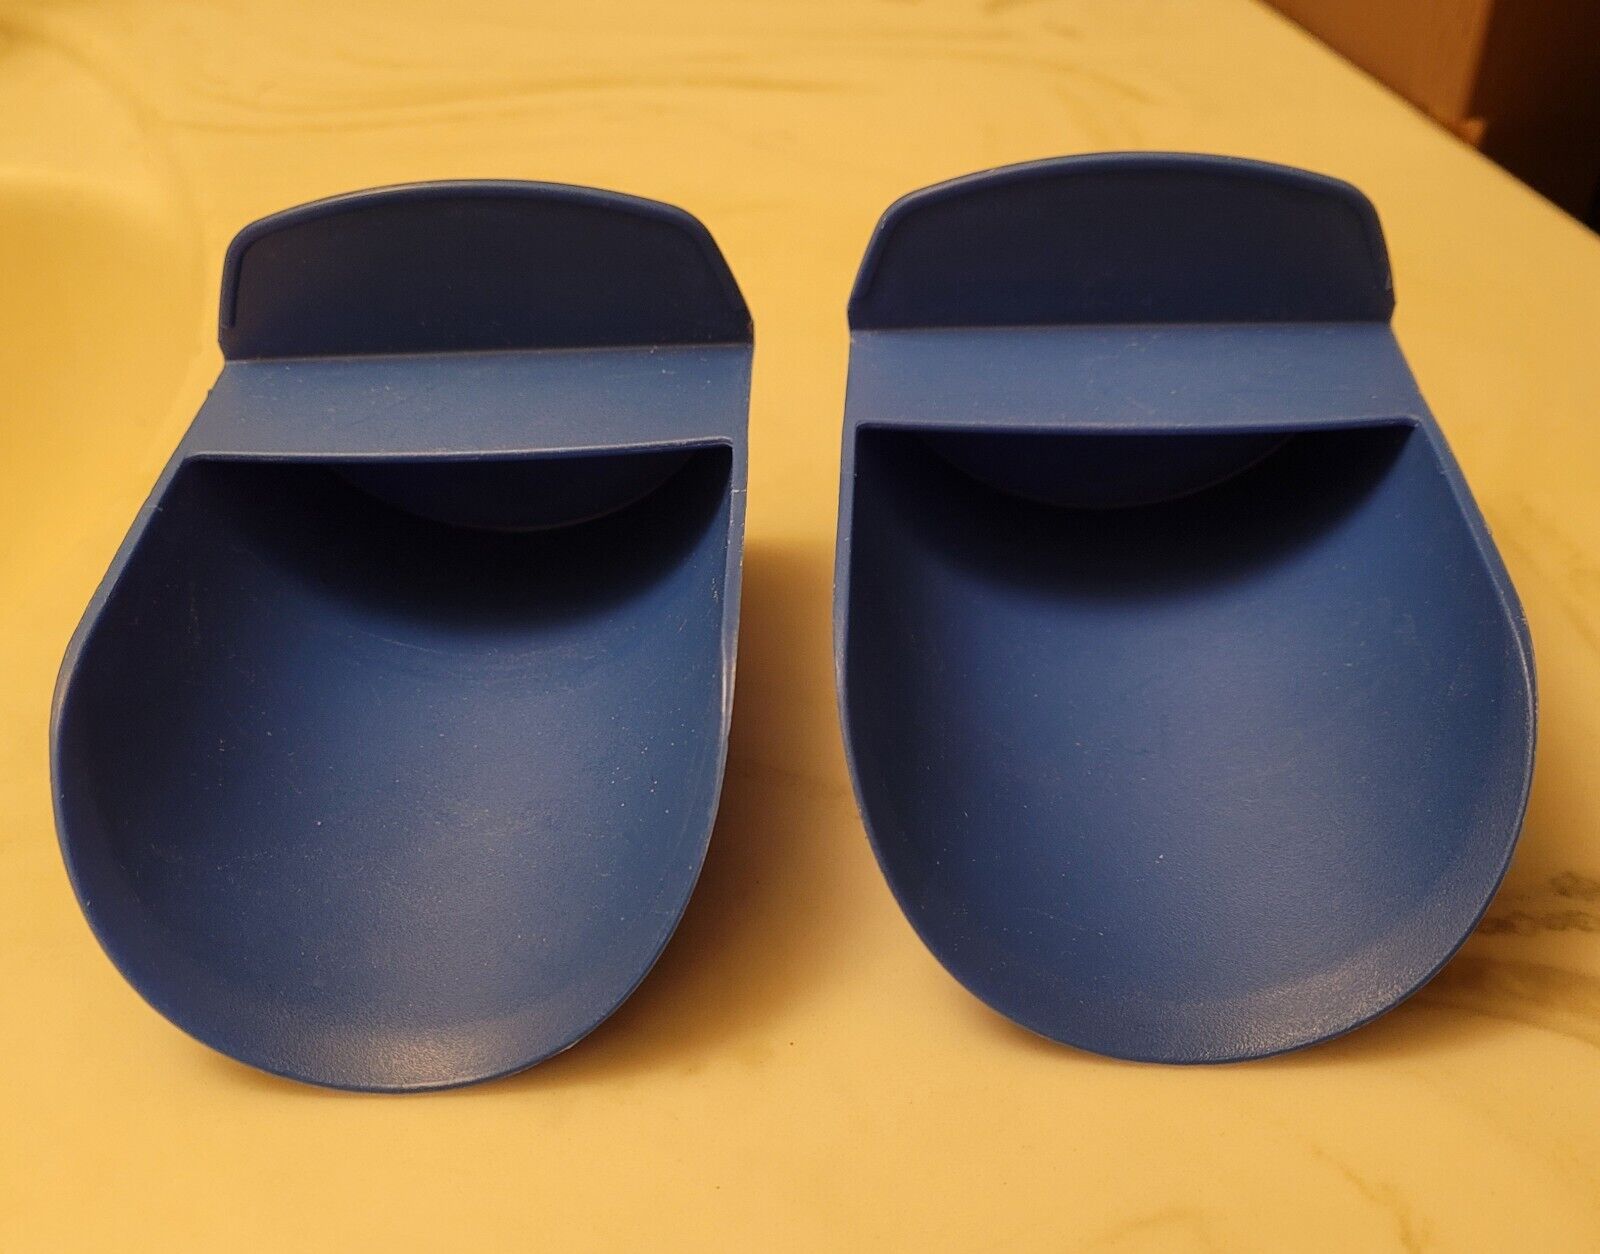 NEW TUPPERWARE ROCKER SCOOPS for Canisters & Modular Mates Kitchen - 2 Blue